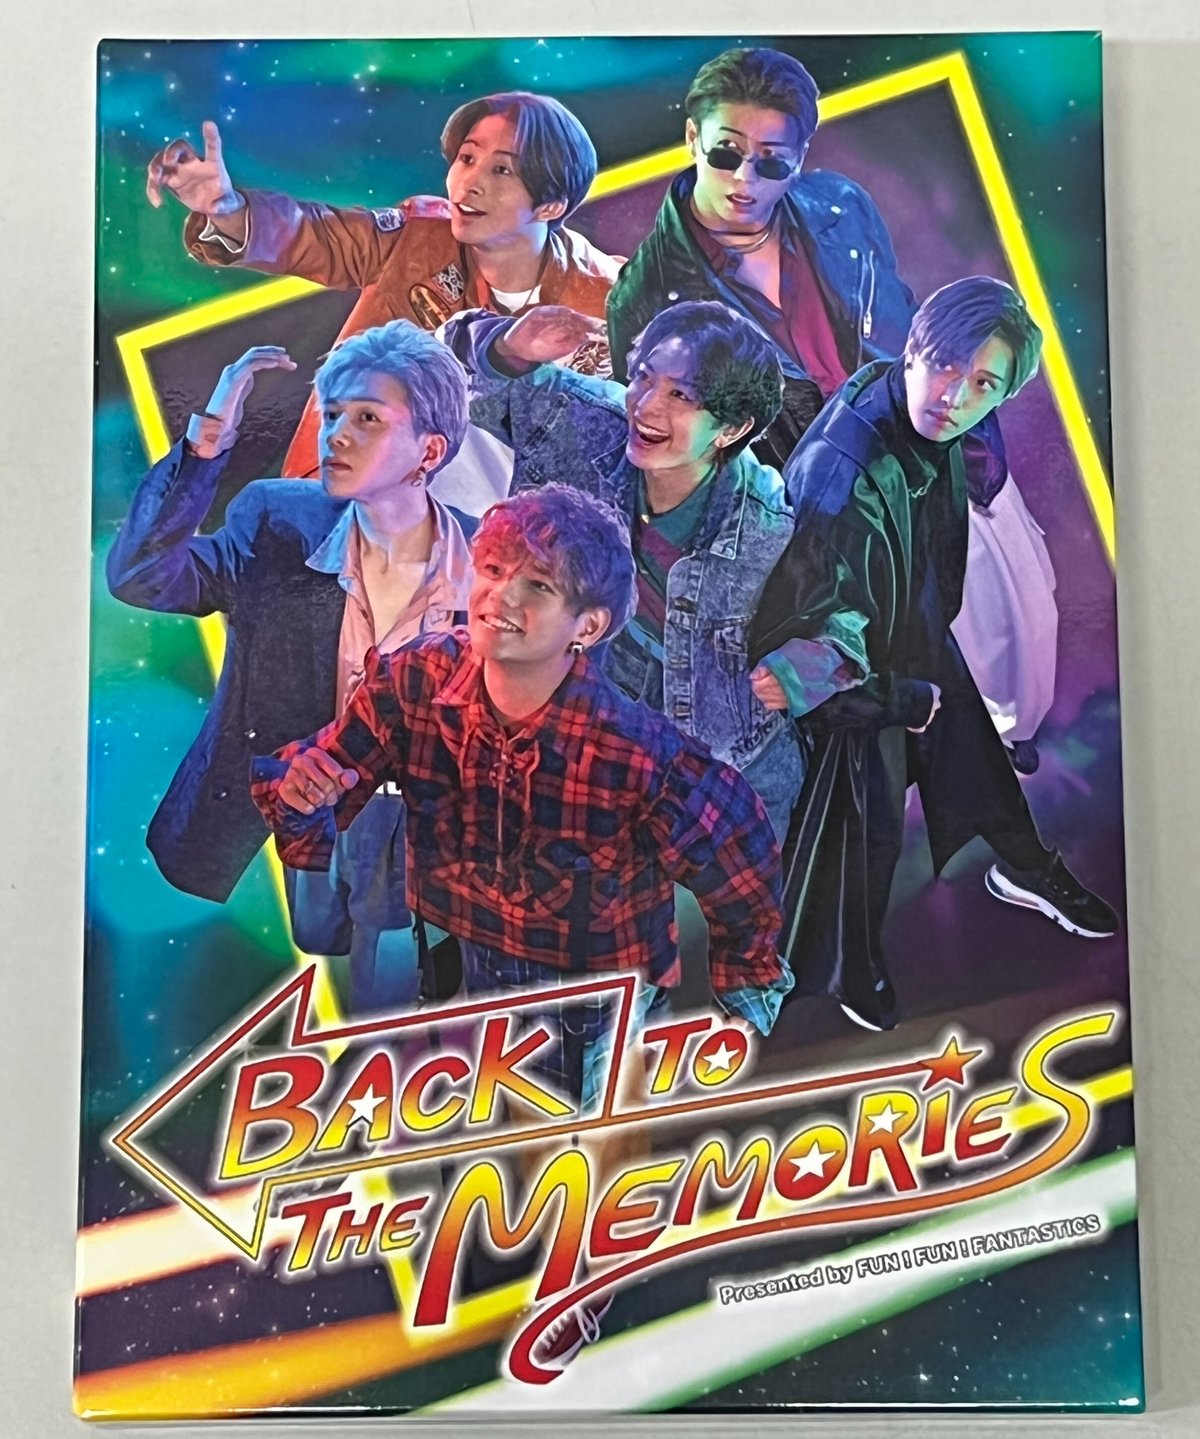 BACK TO THE MEMORIES BluRay